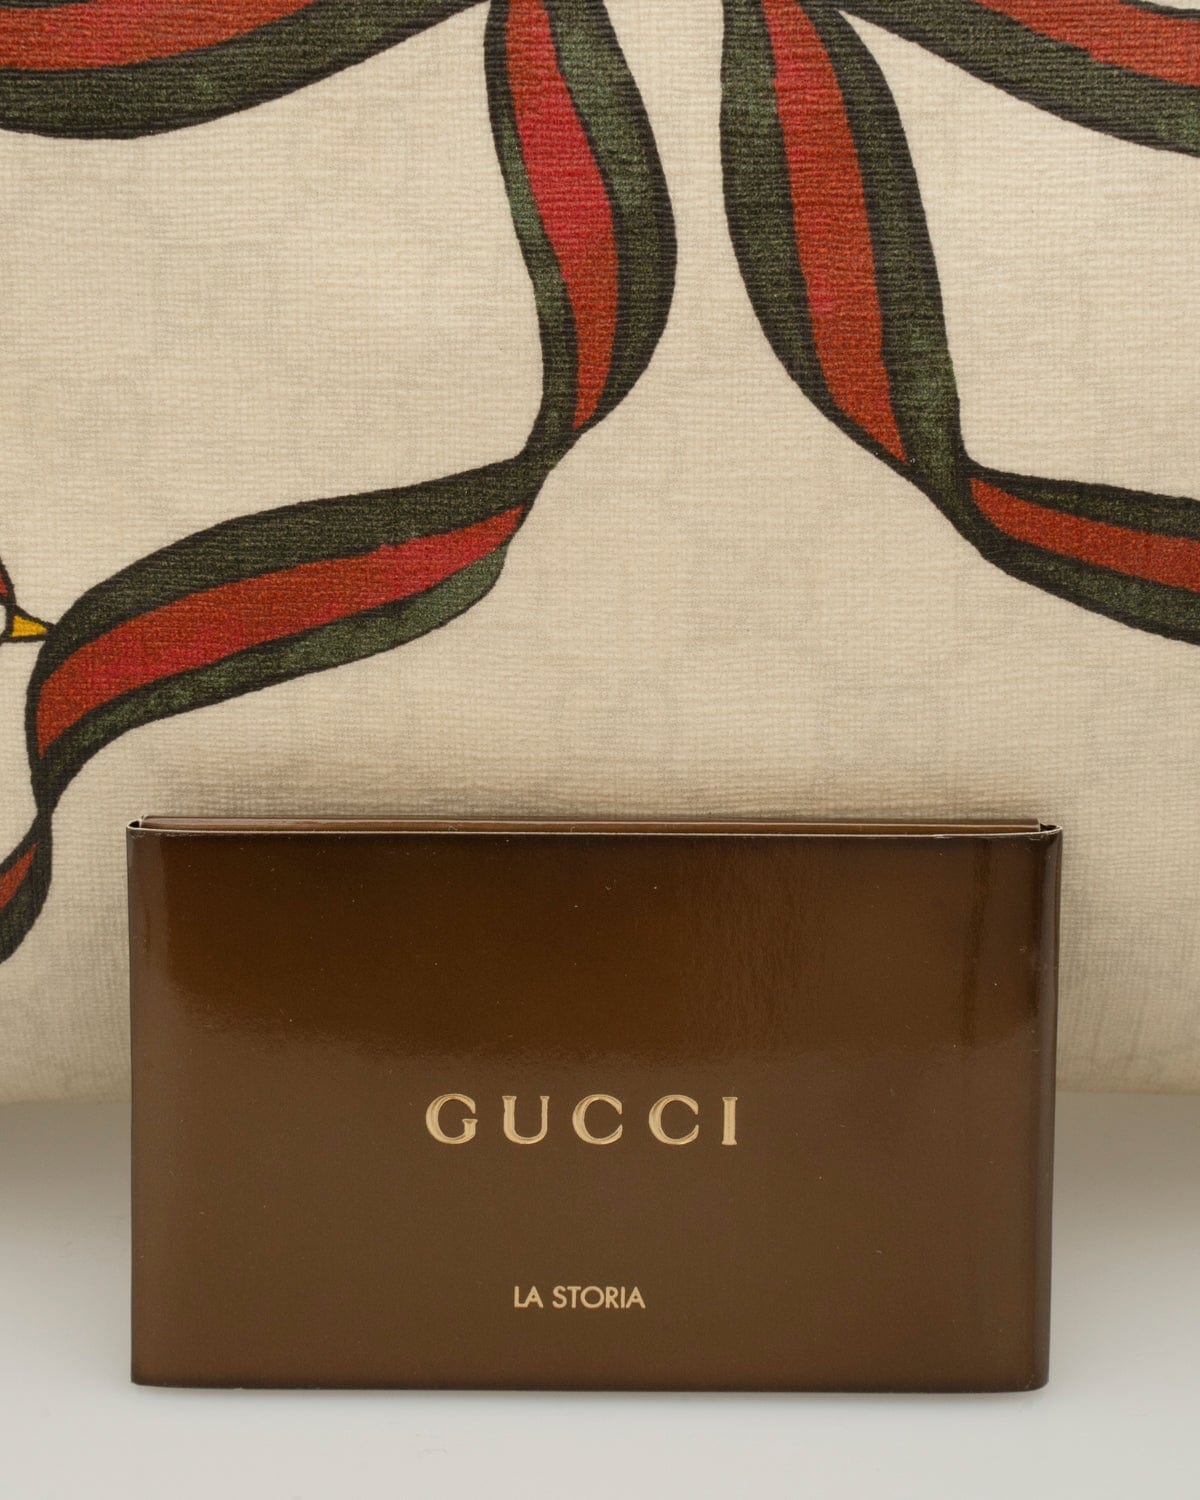 Gucci Gucci Limited Edition Boston bag with Love Heart Tattoo Bag - ADL1674